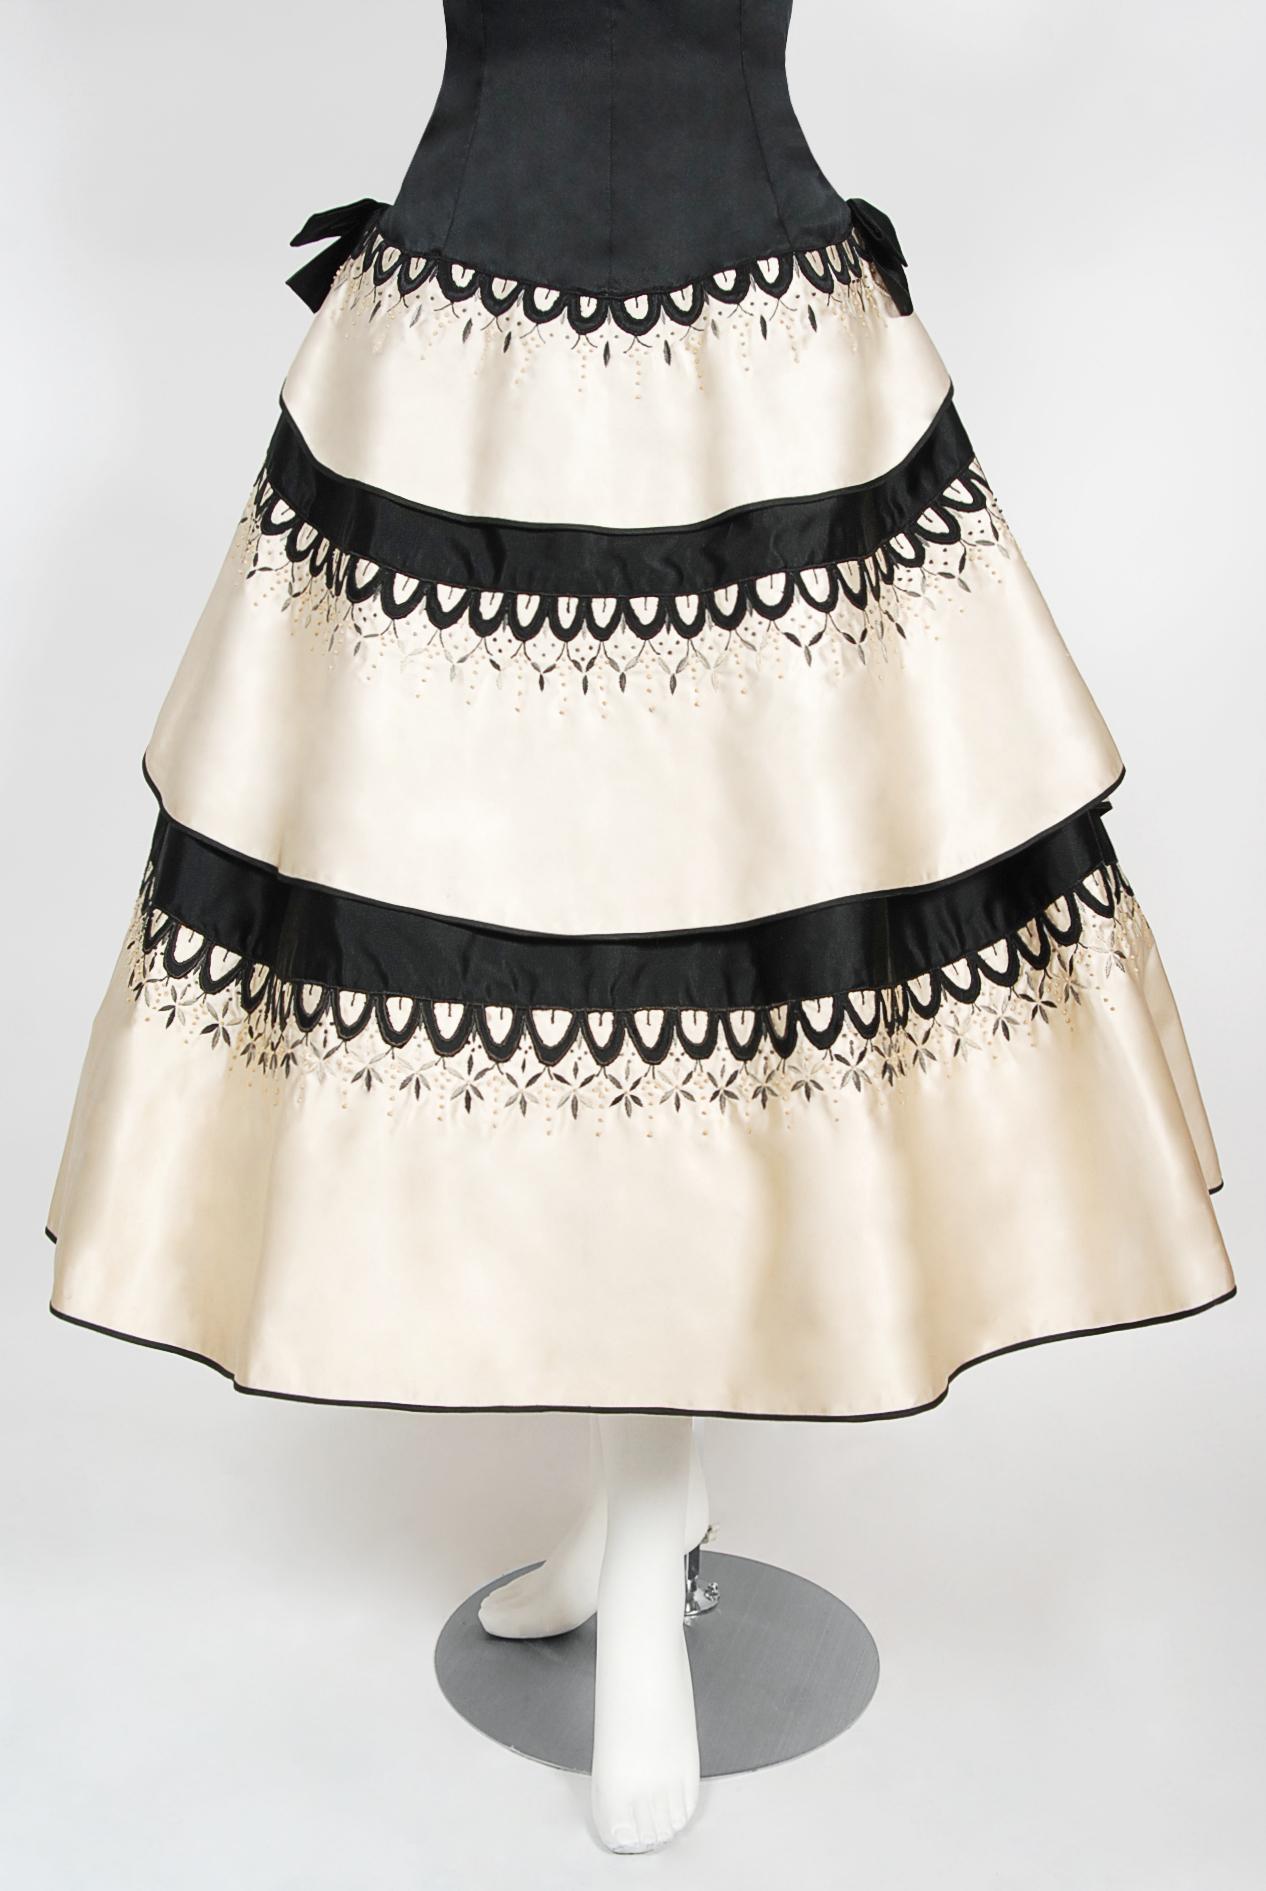 Vintage 1950's Emilio Schuberth Couture Black & Ivory Embroidered Satin Dress For Sale 6